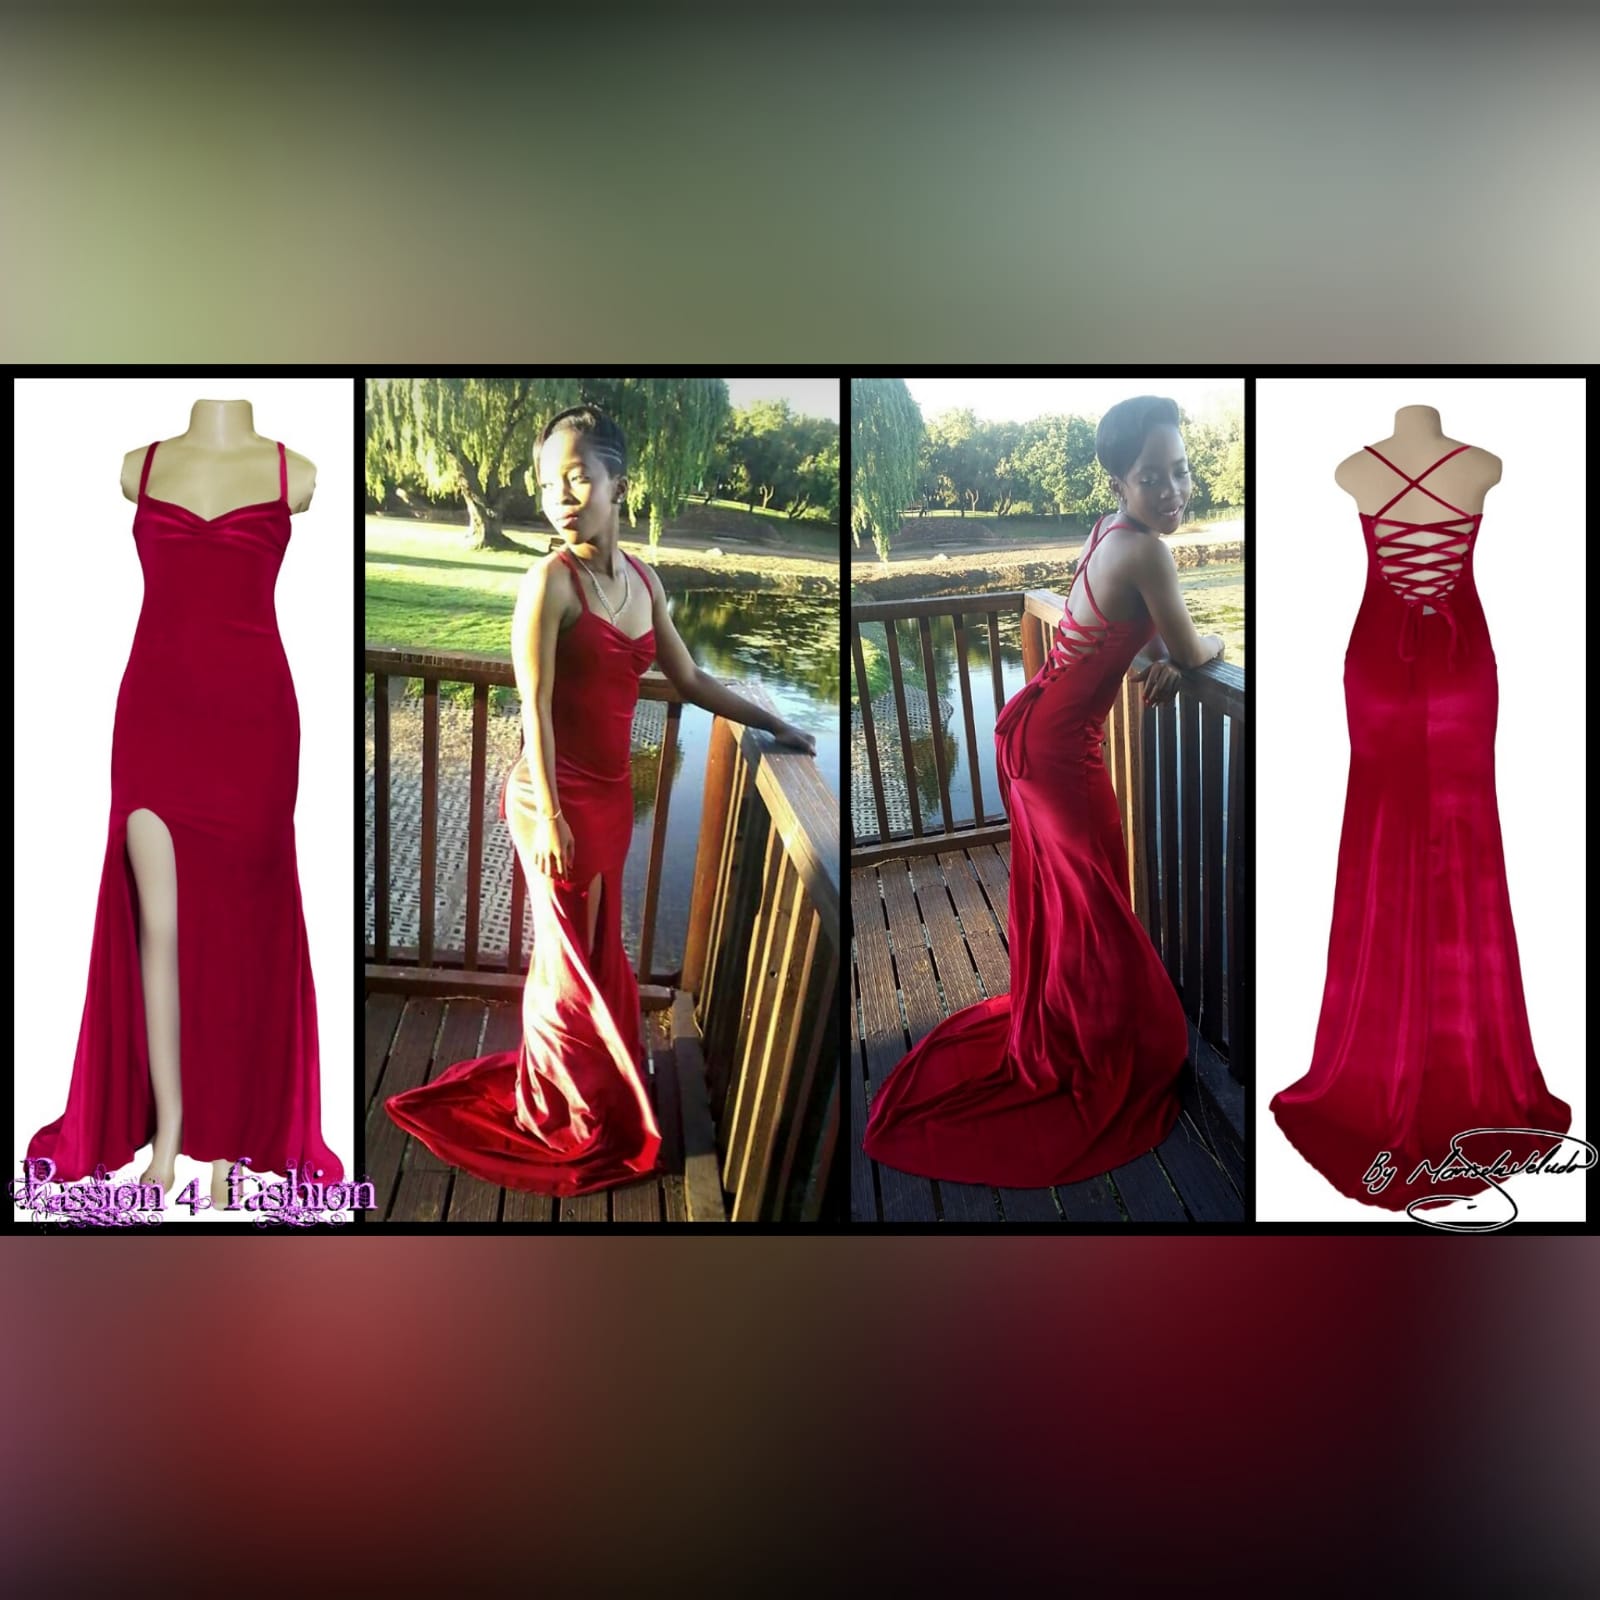 Red velvet long fitted evening party dress 3 red velvet long fitted evening party dress. This design has a laceup back which adds a stunning look to it and also helps adjust the dress fit. It has a high slit and a train for a dramatic effect.